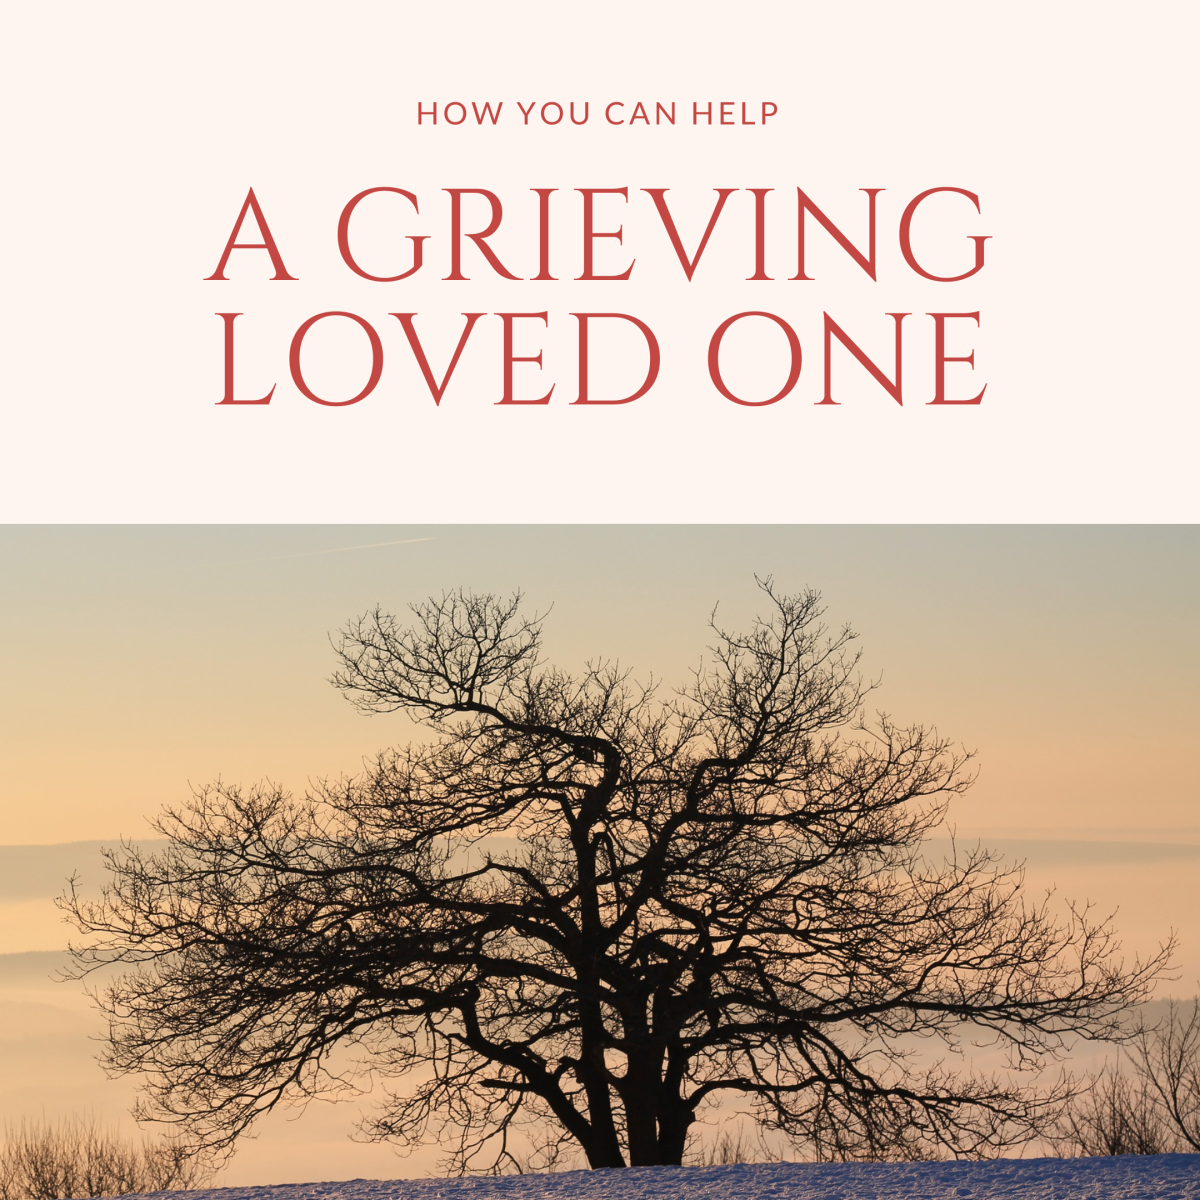 14 Ways You Can Help a Grieving Friend or Family Member